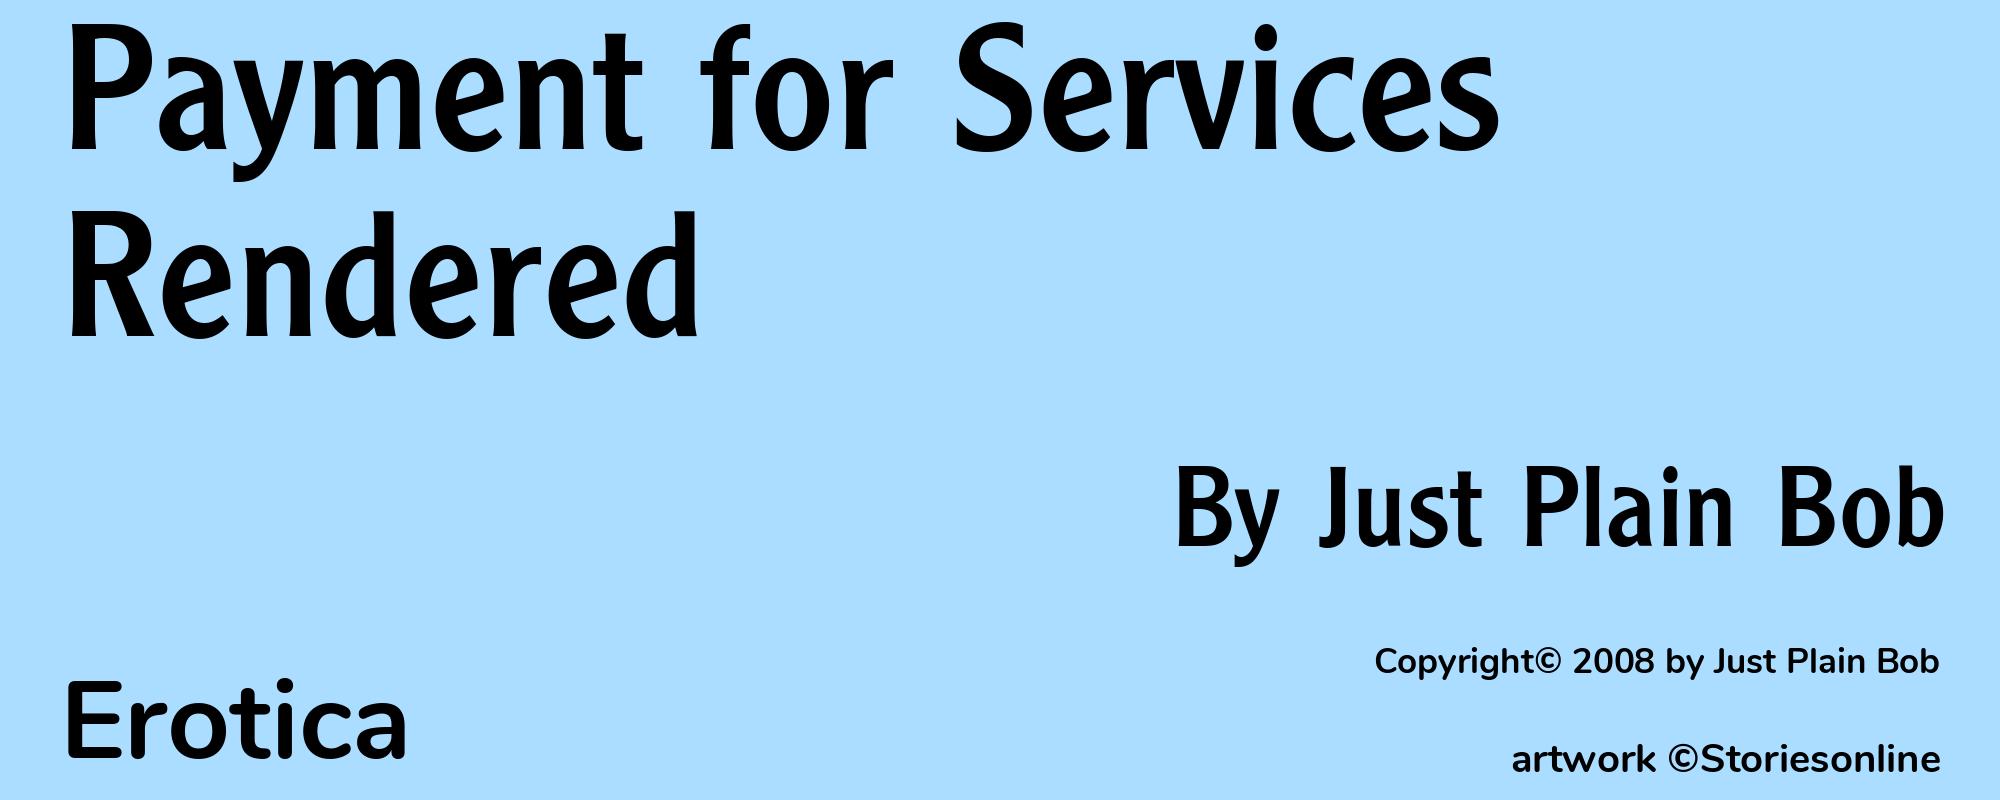 Payment for Services Rendered - Cover